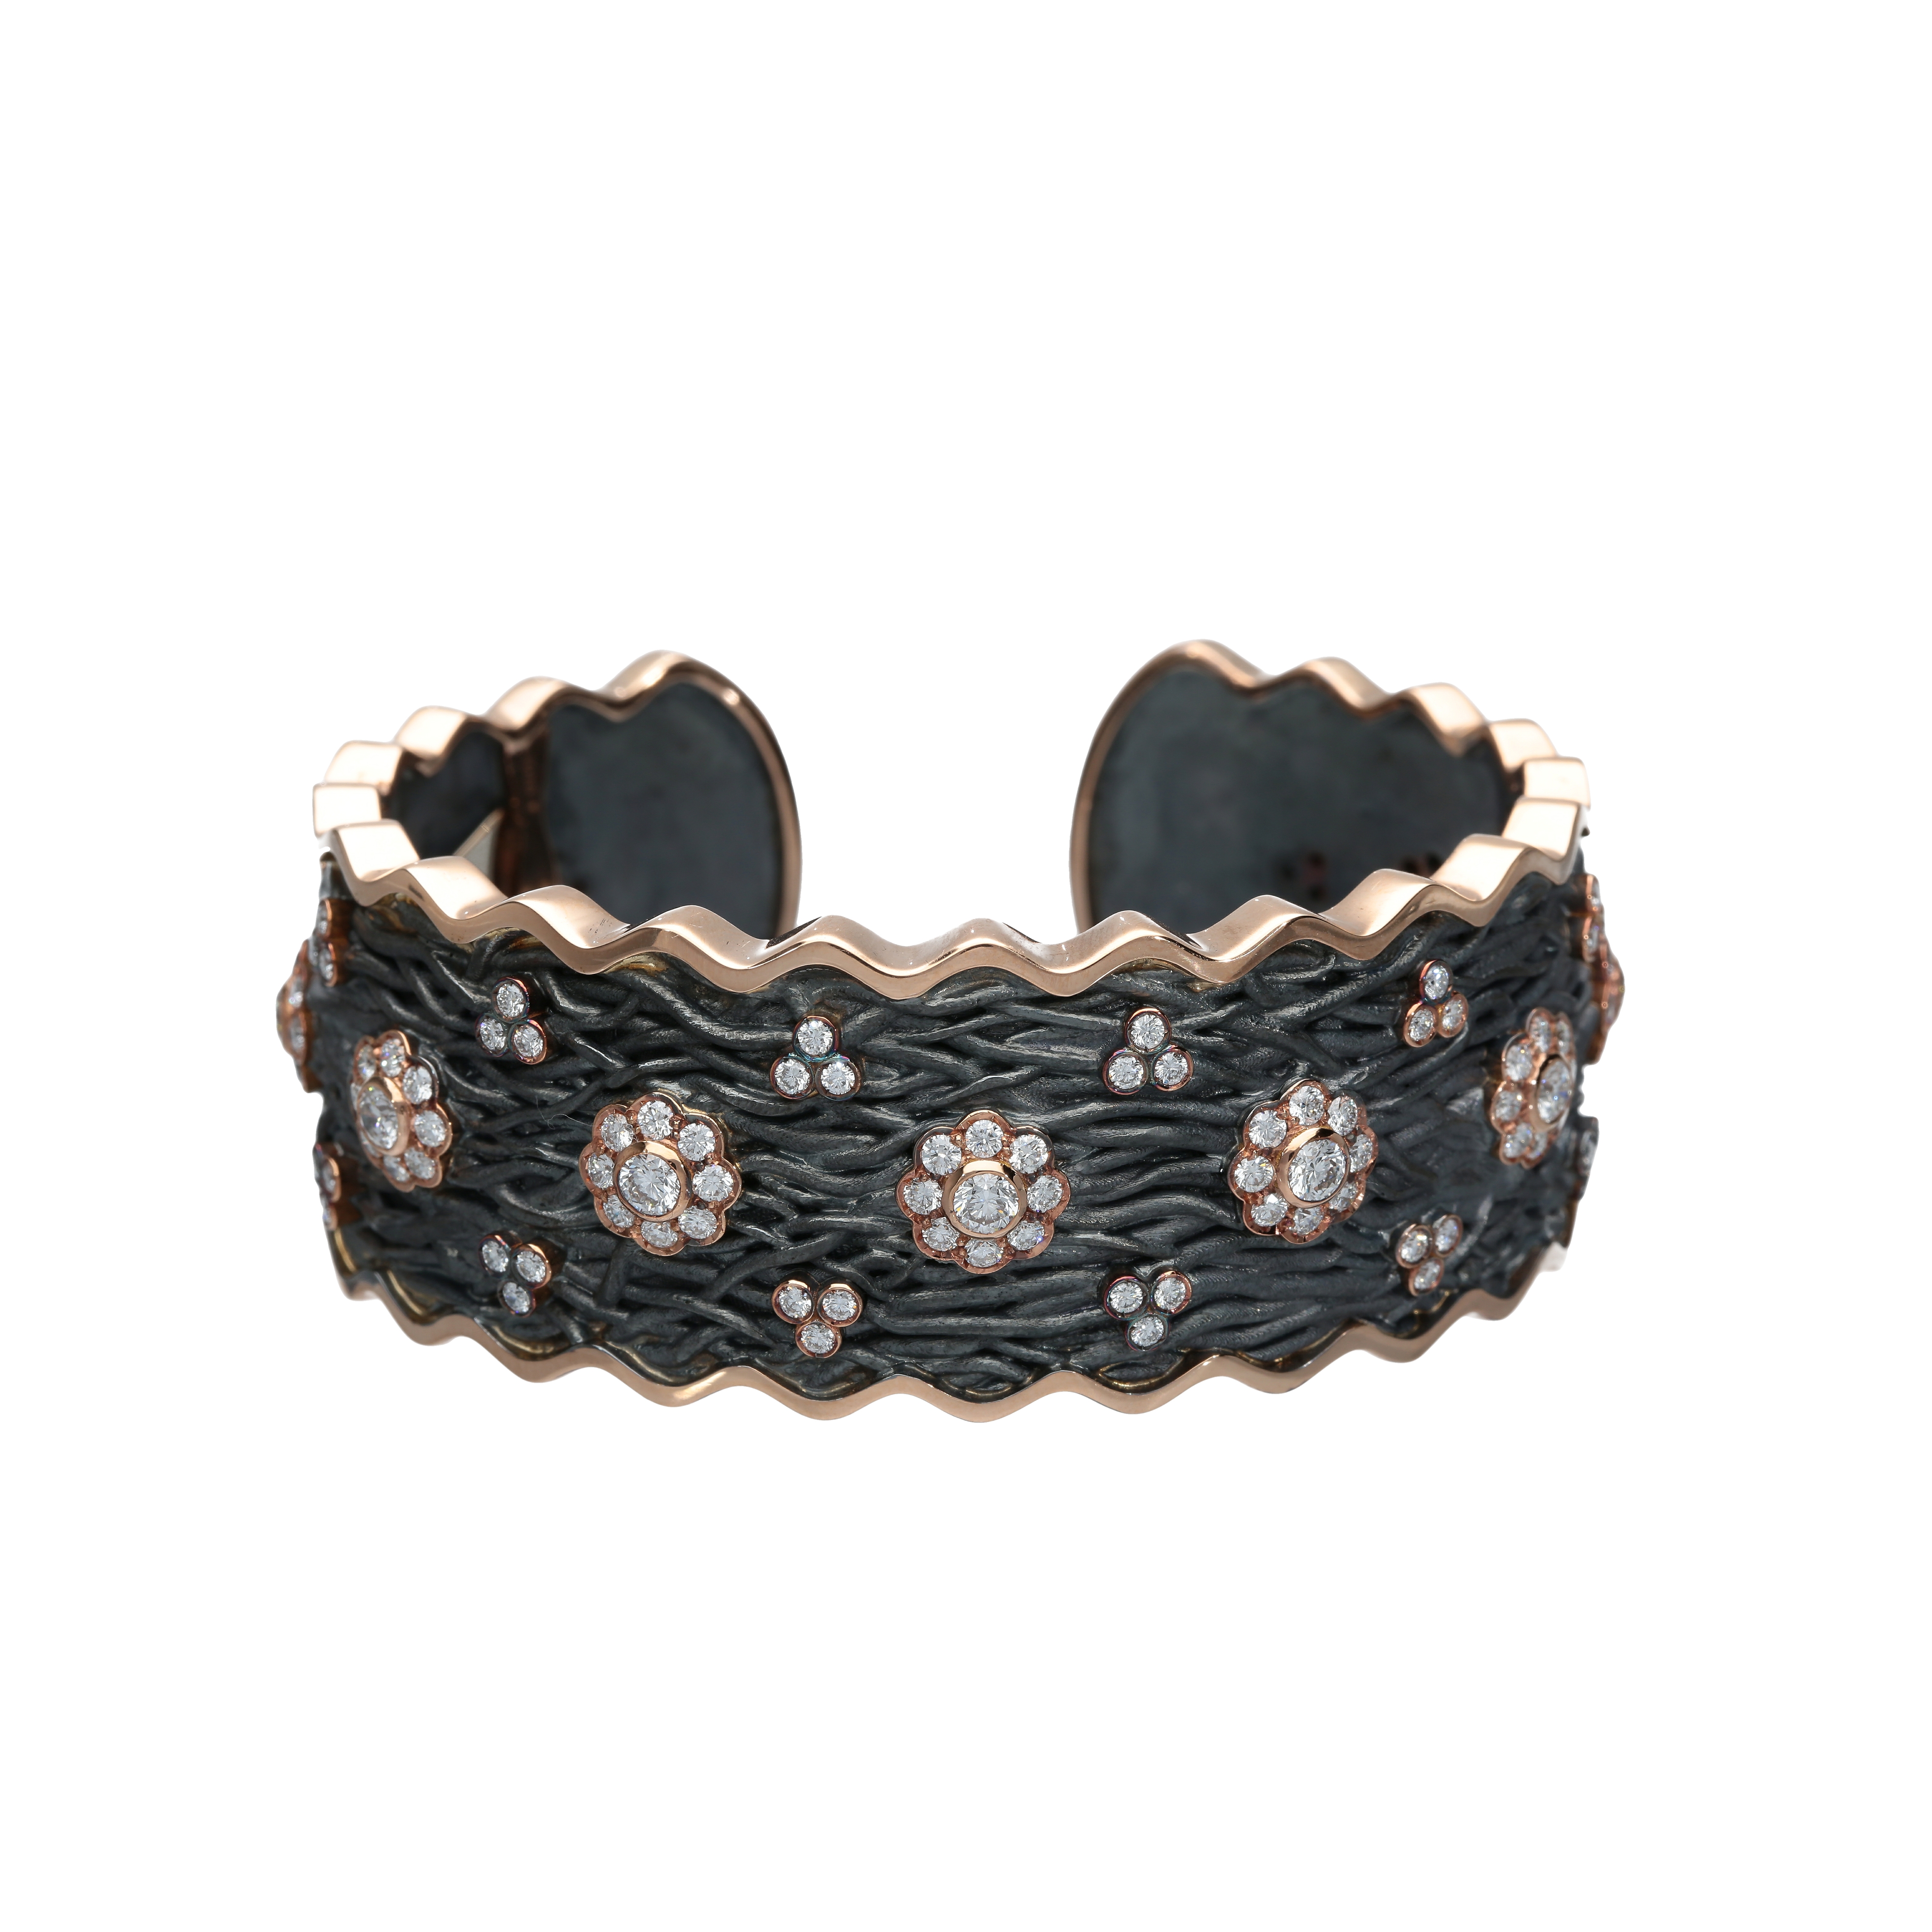 Roots Collection cuff bracelet in rose gold 18kt and silver oxidized with diamonds